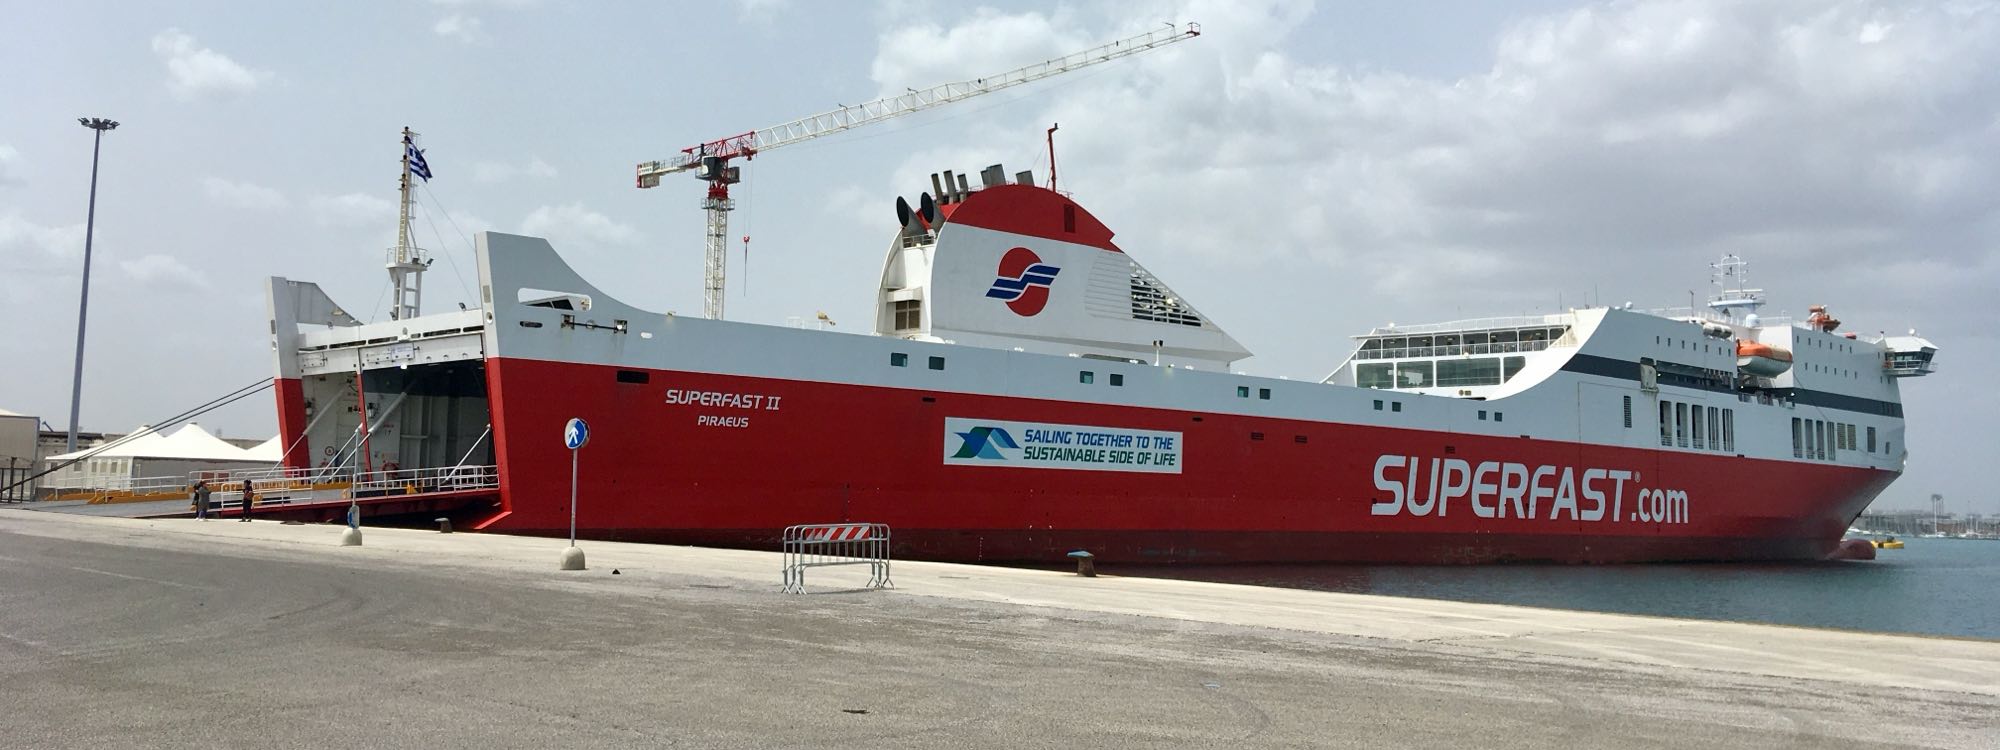 Photo of a red ferry called Superfast 2